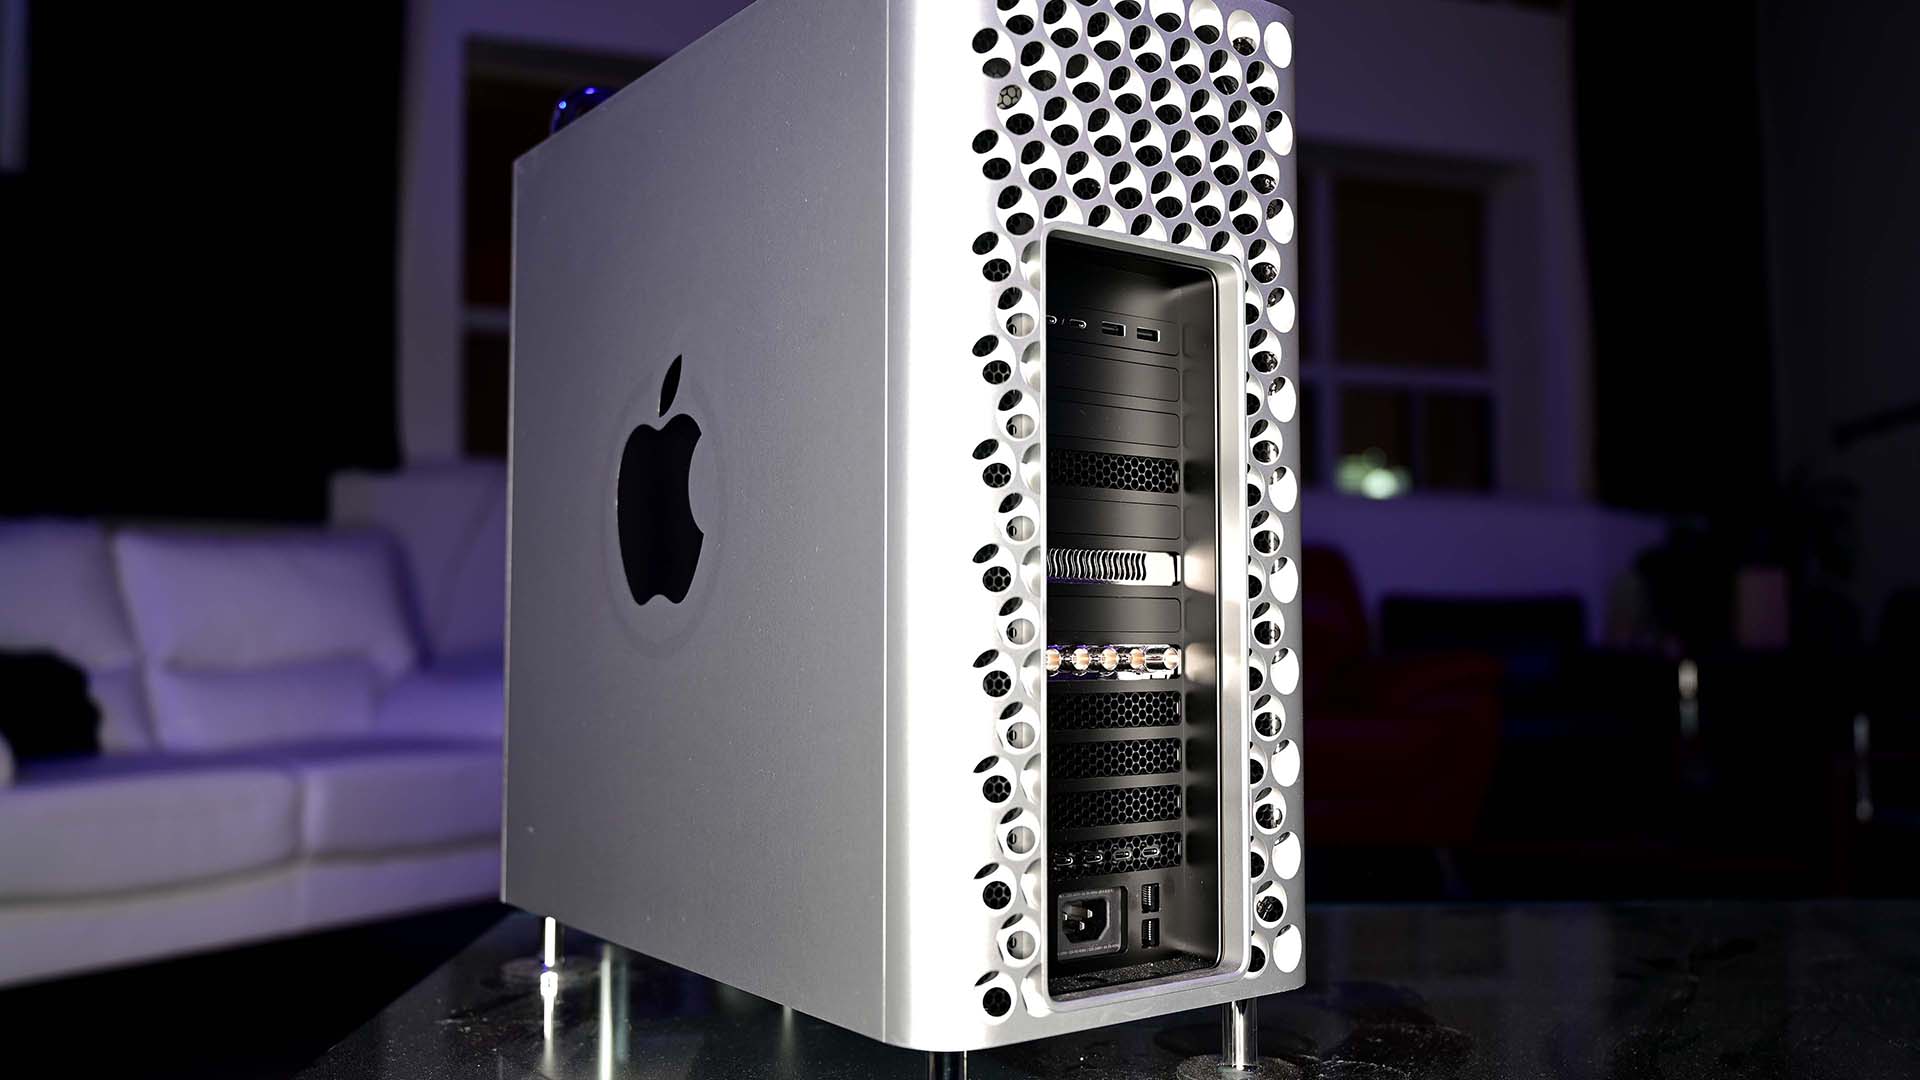 Pure Mac Pro Computer With Afterburner And 4 SDI 12G Video Card Toronto